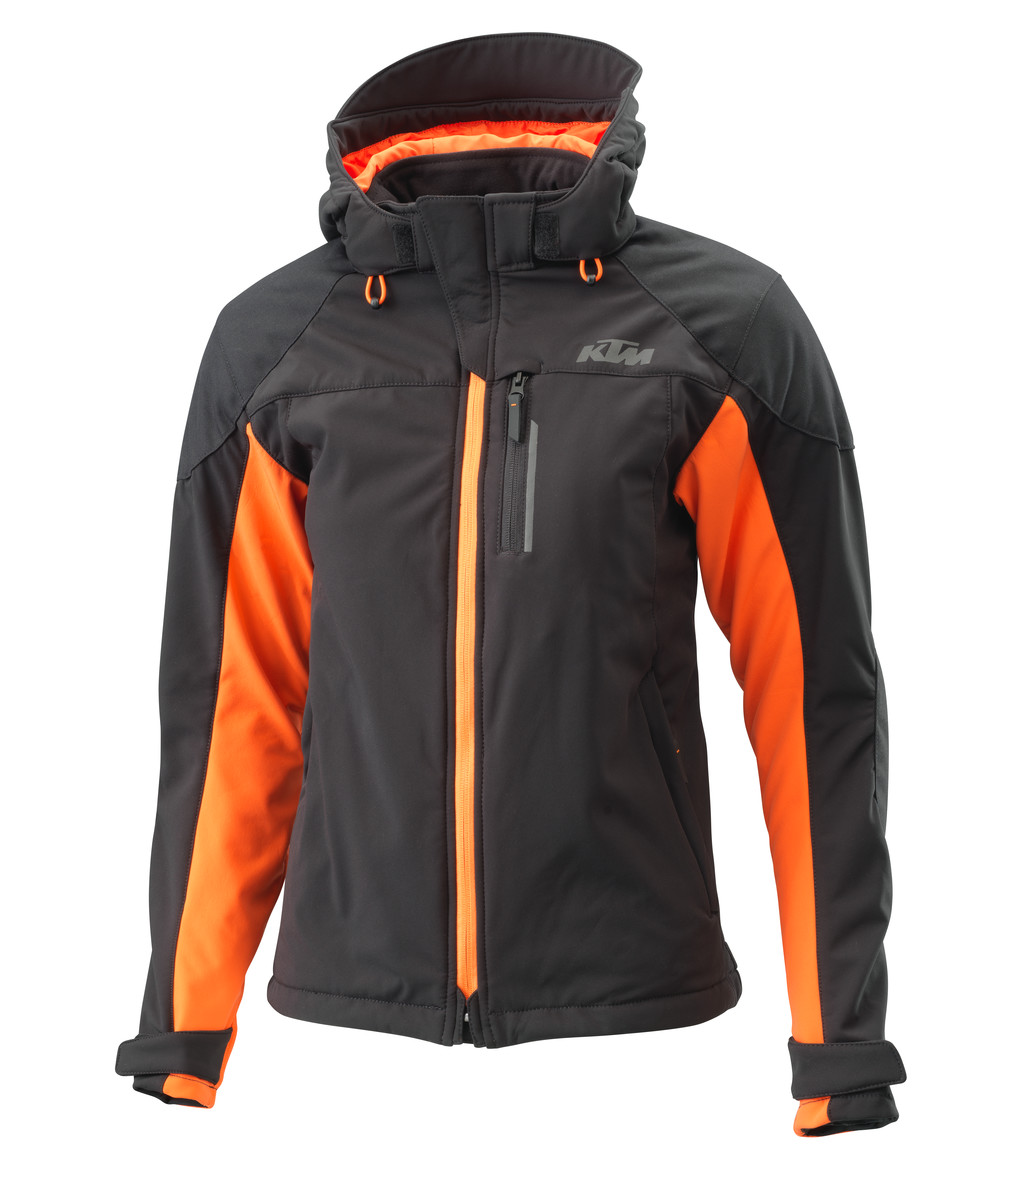 Blended Motorcycle Riding Jacket For KTM, No